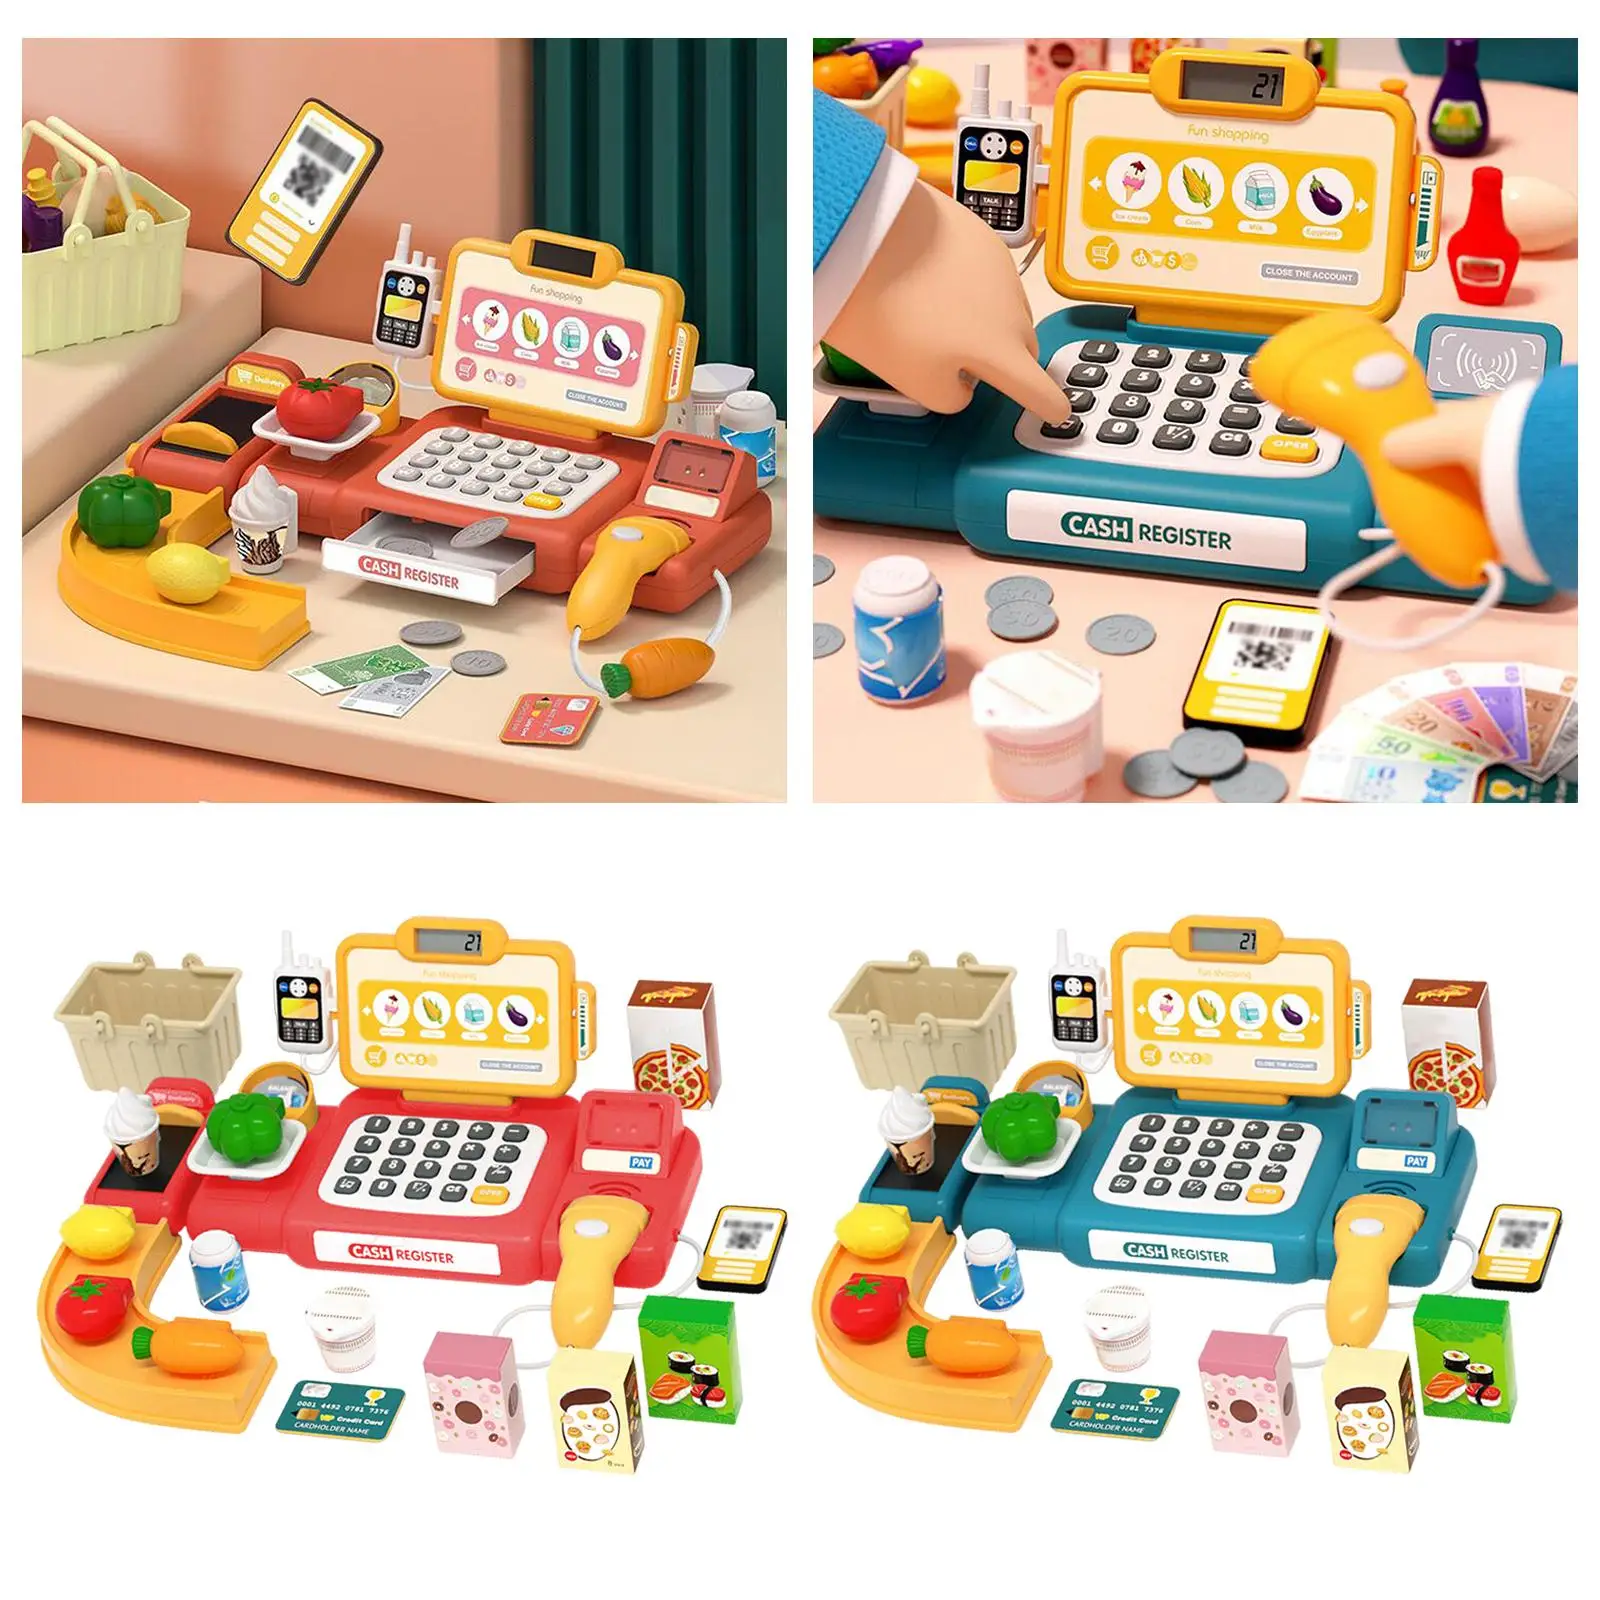 Supermarket Cashier Toy Imaginative Grocery Supermarket Playset for Role Play Activity Preschool Resource Interaction